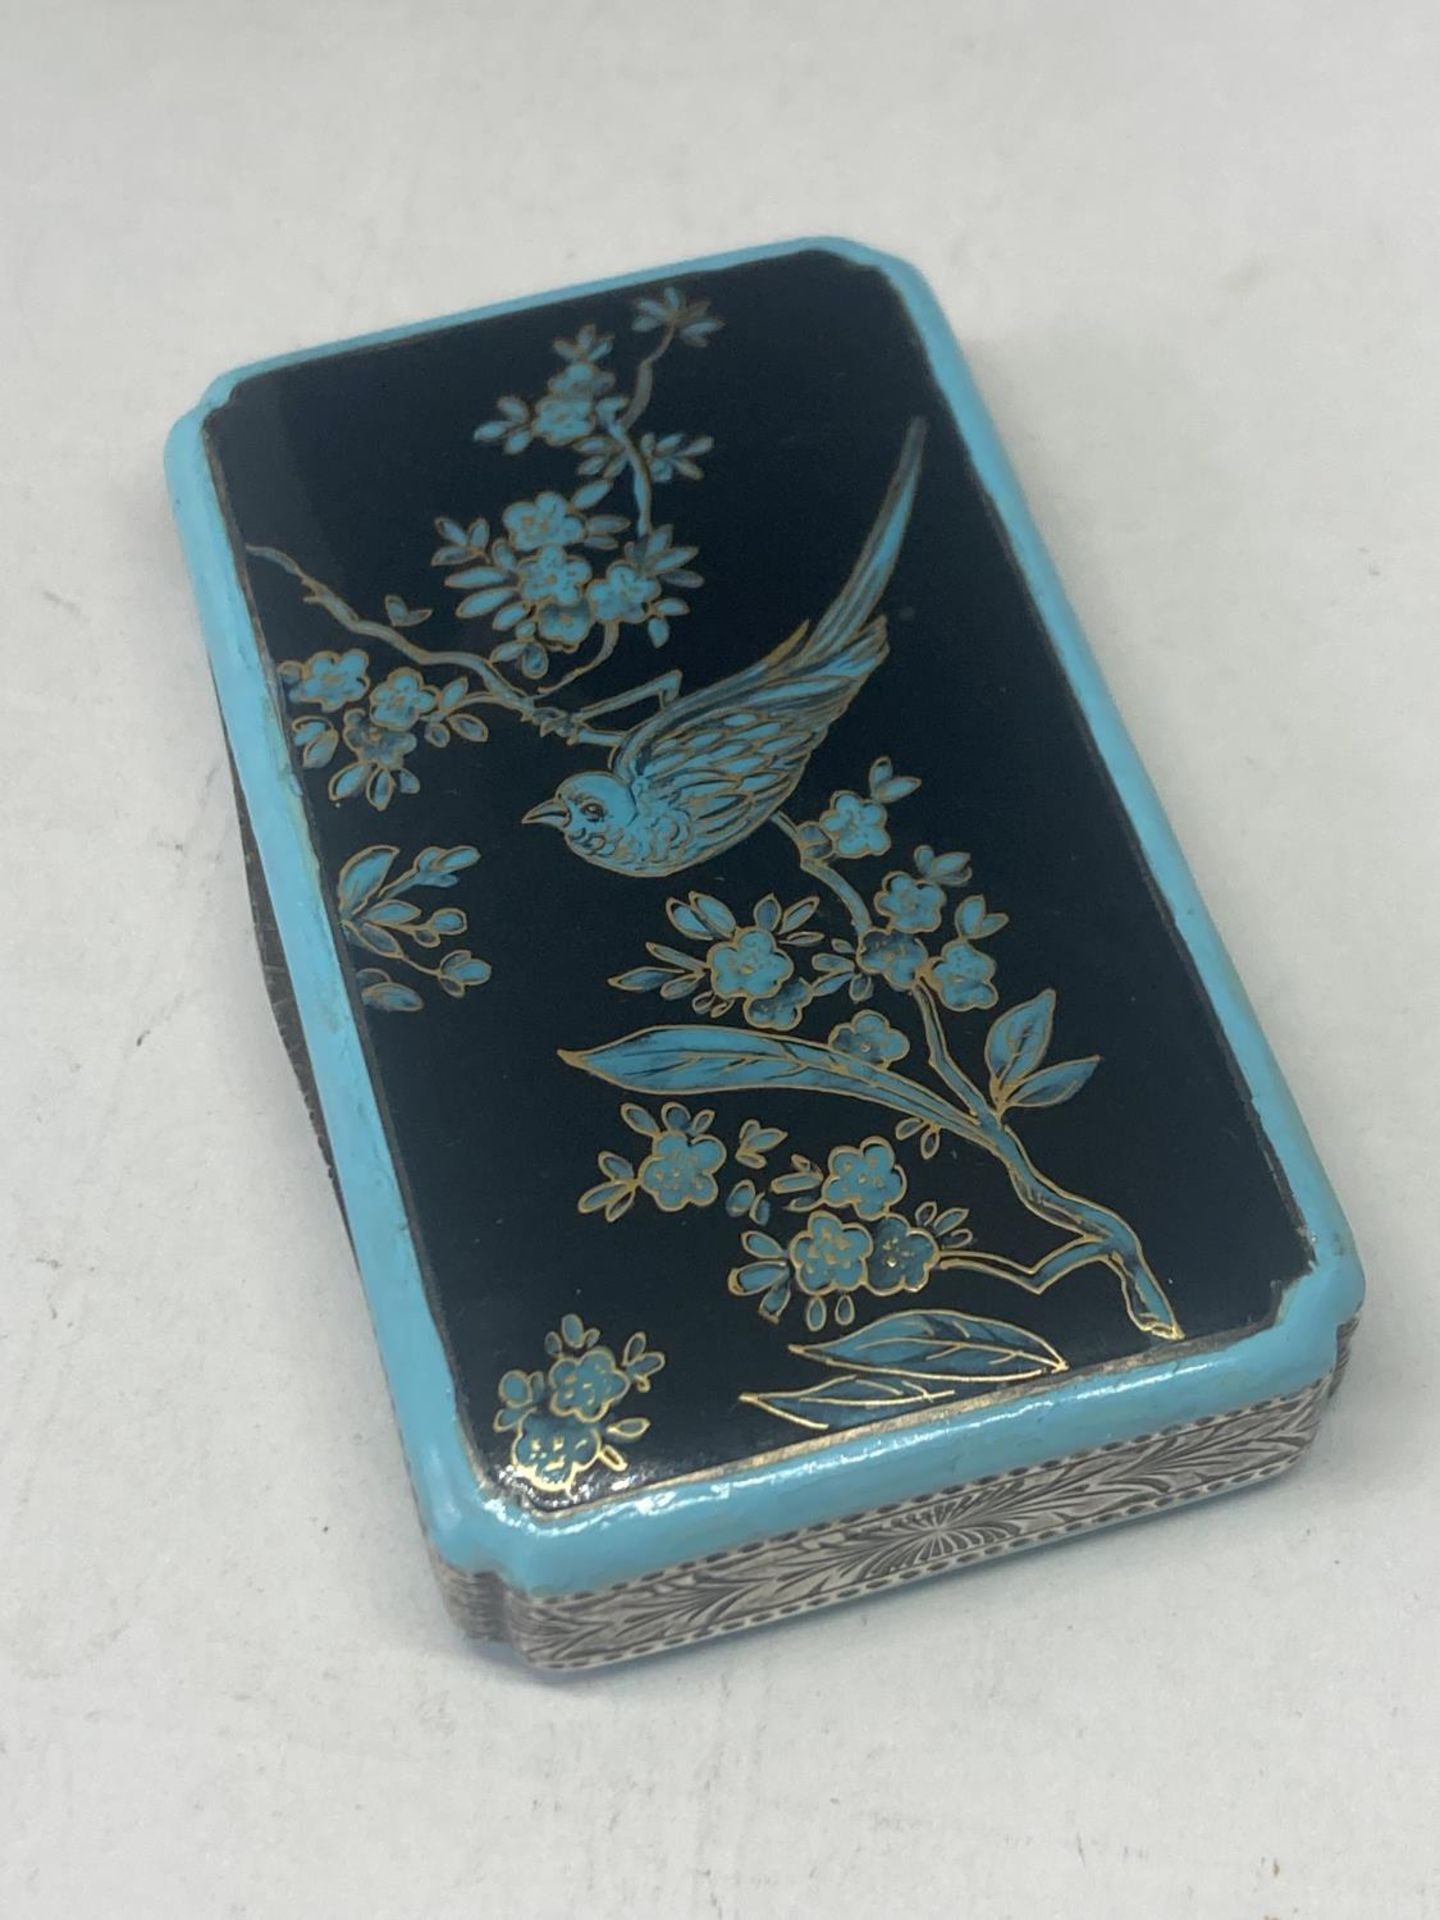 A SILVER AND ENAMEL TRINKET BOX WITH A TURQUOISE BLUE AND BLACK ORIENTAL BIRD DECORATION